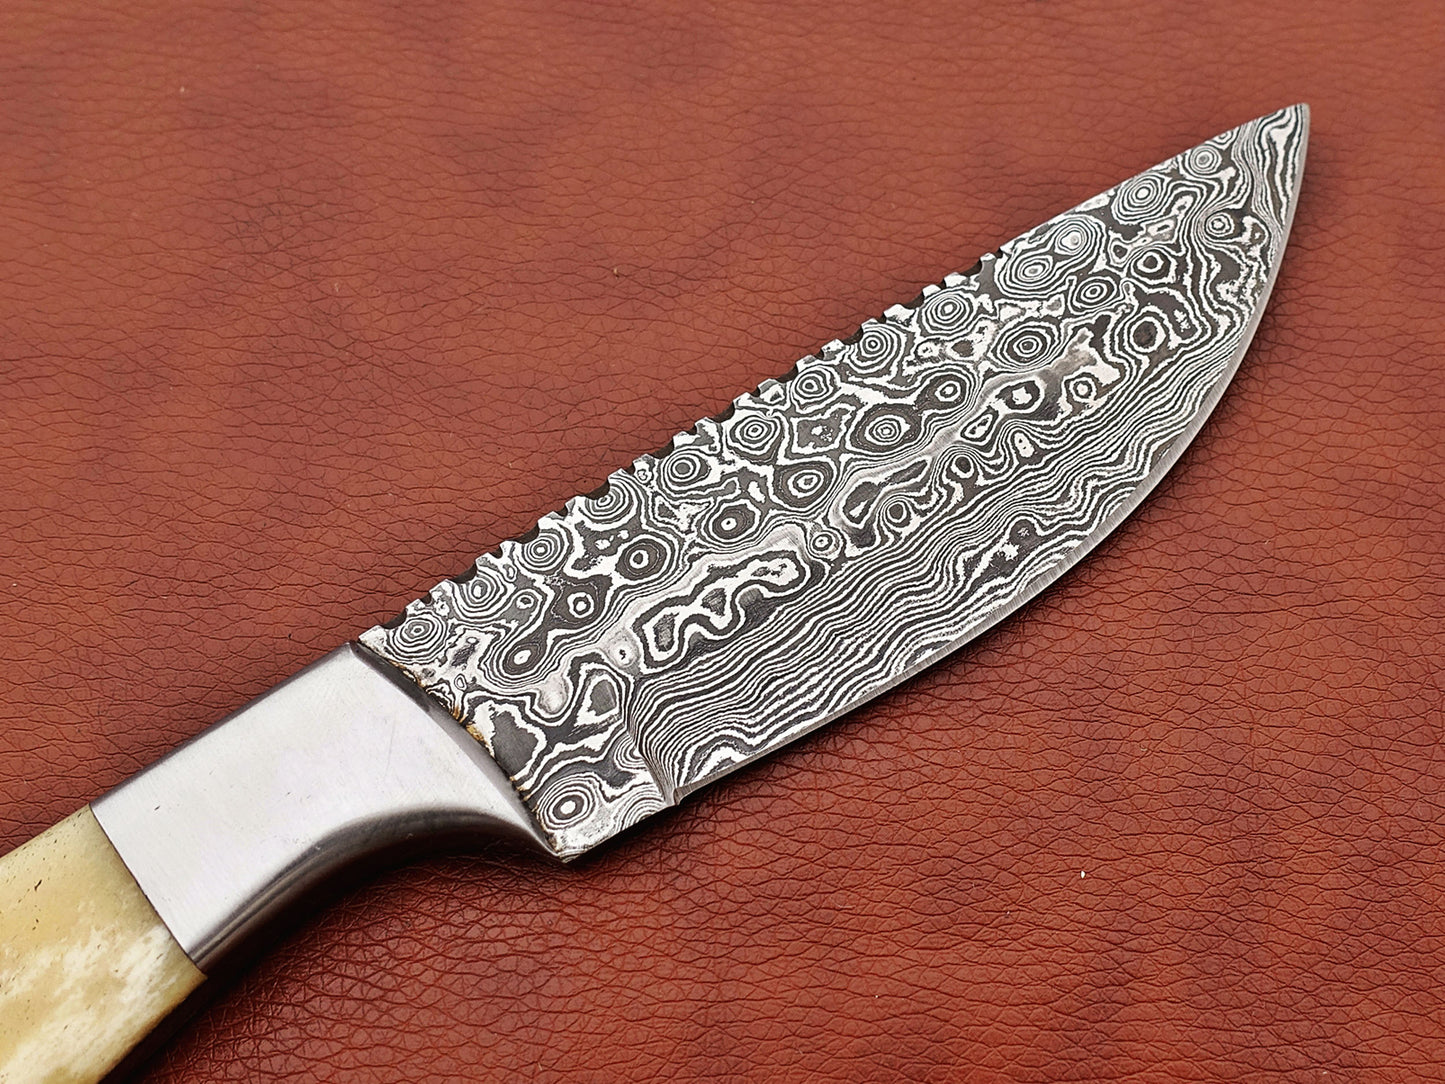 9.5" full tang Rain drop pattern skinning knife, 5" straight back Damascus steel blade, Available in 4 colors,  includes Cow hide Leather sheath